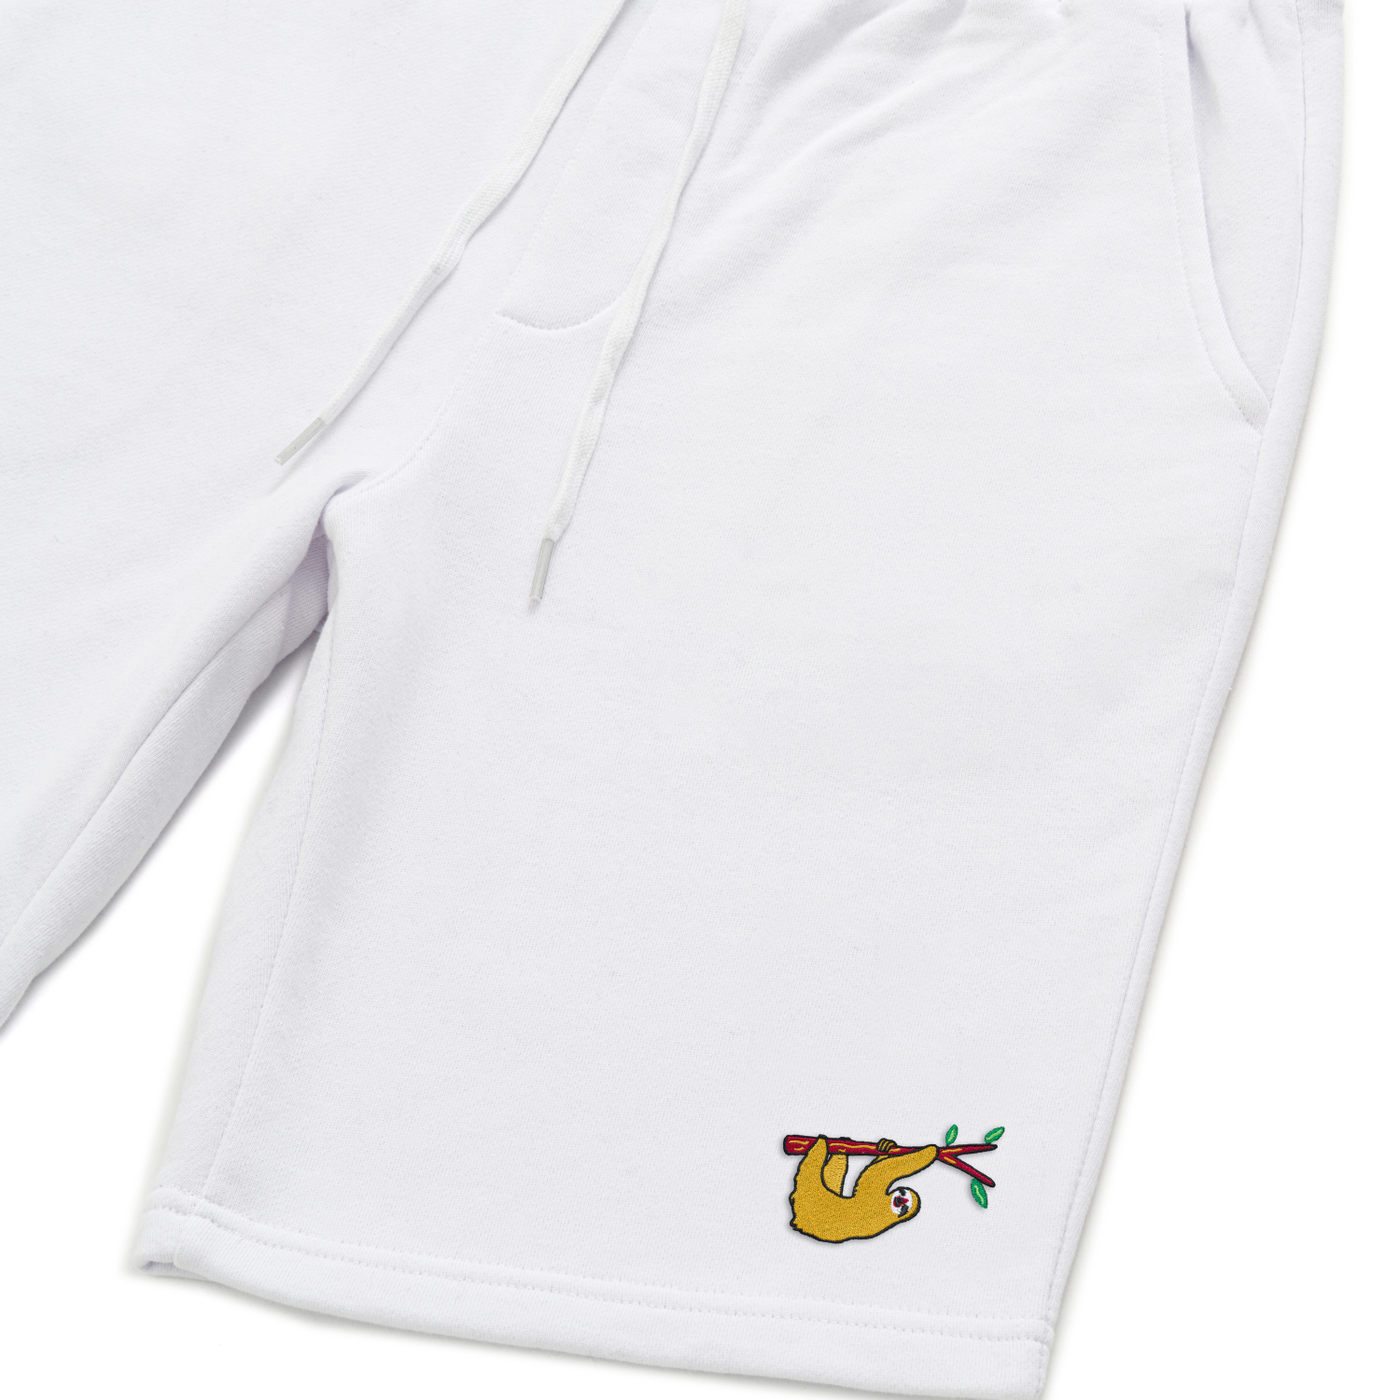 Bobby's Planet Men's Embroidered Sloth Shorts from South American Amazon Animals Collection in White Color#color_white